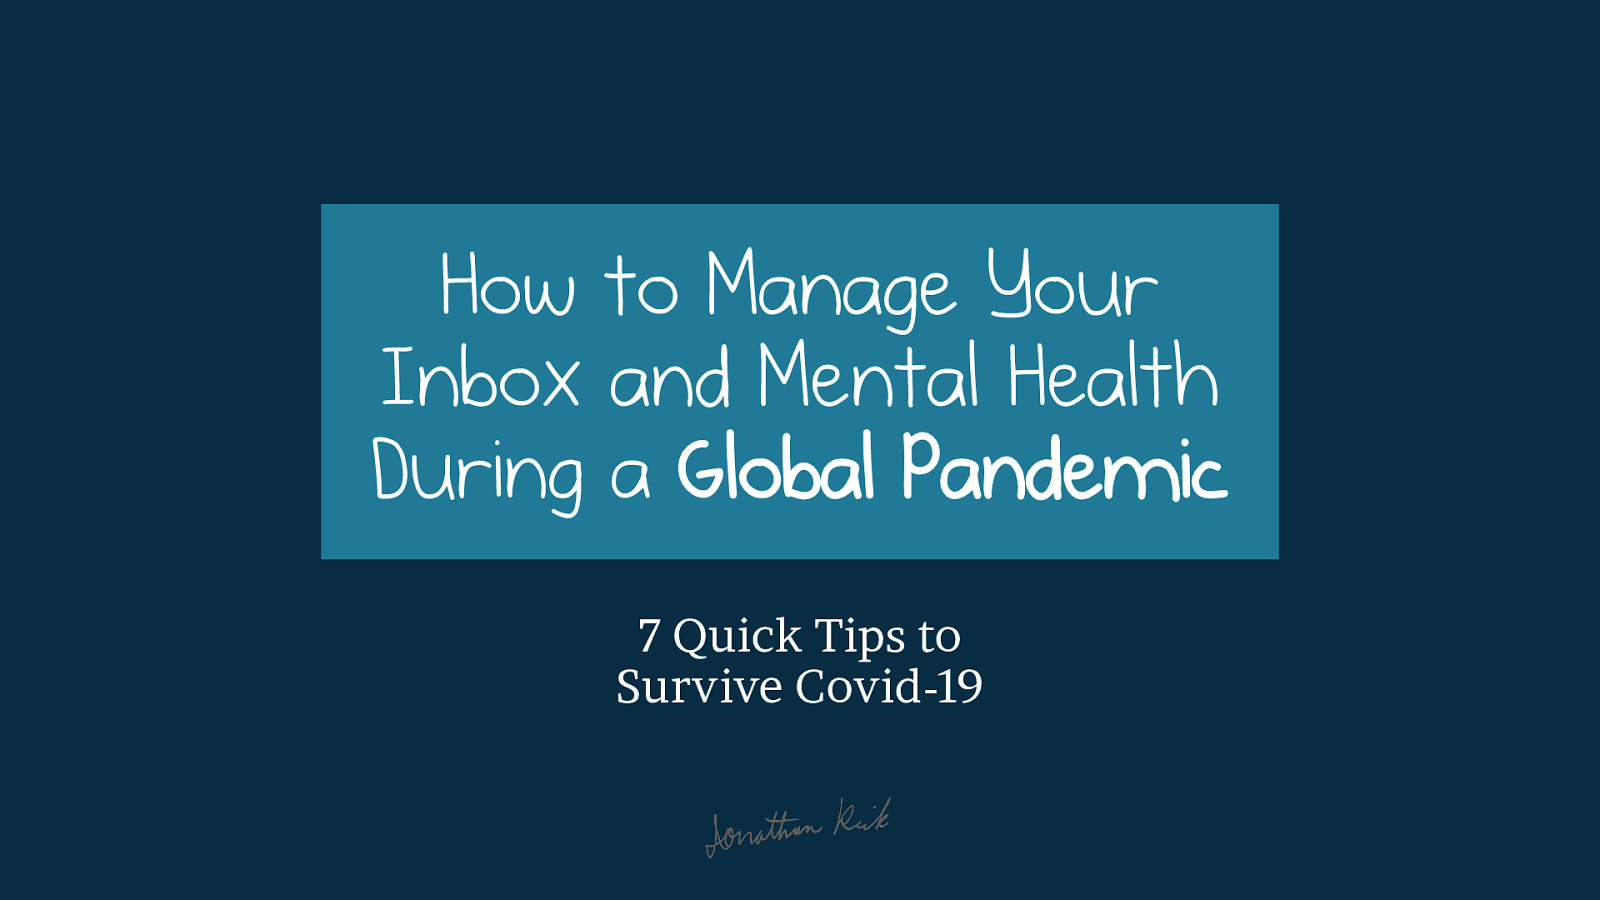 How to Manage Your Inbox and Mental Health During a Pandemic